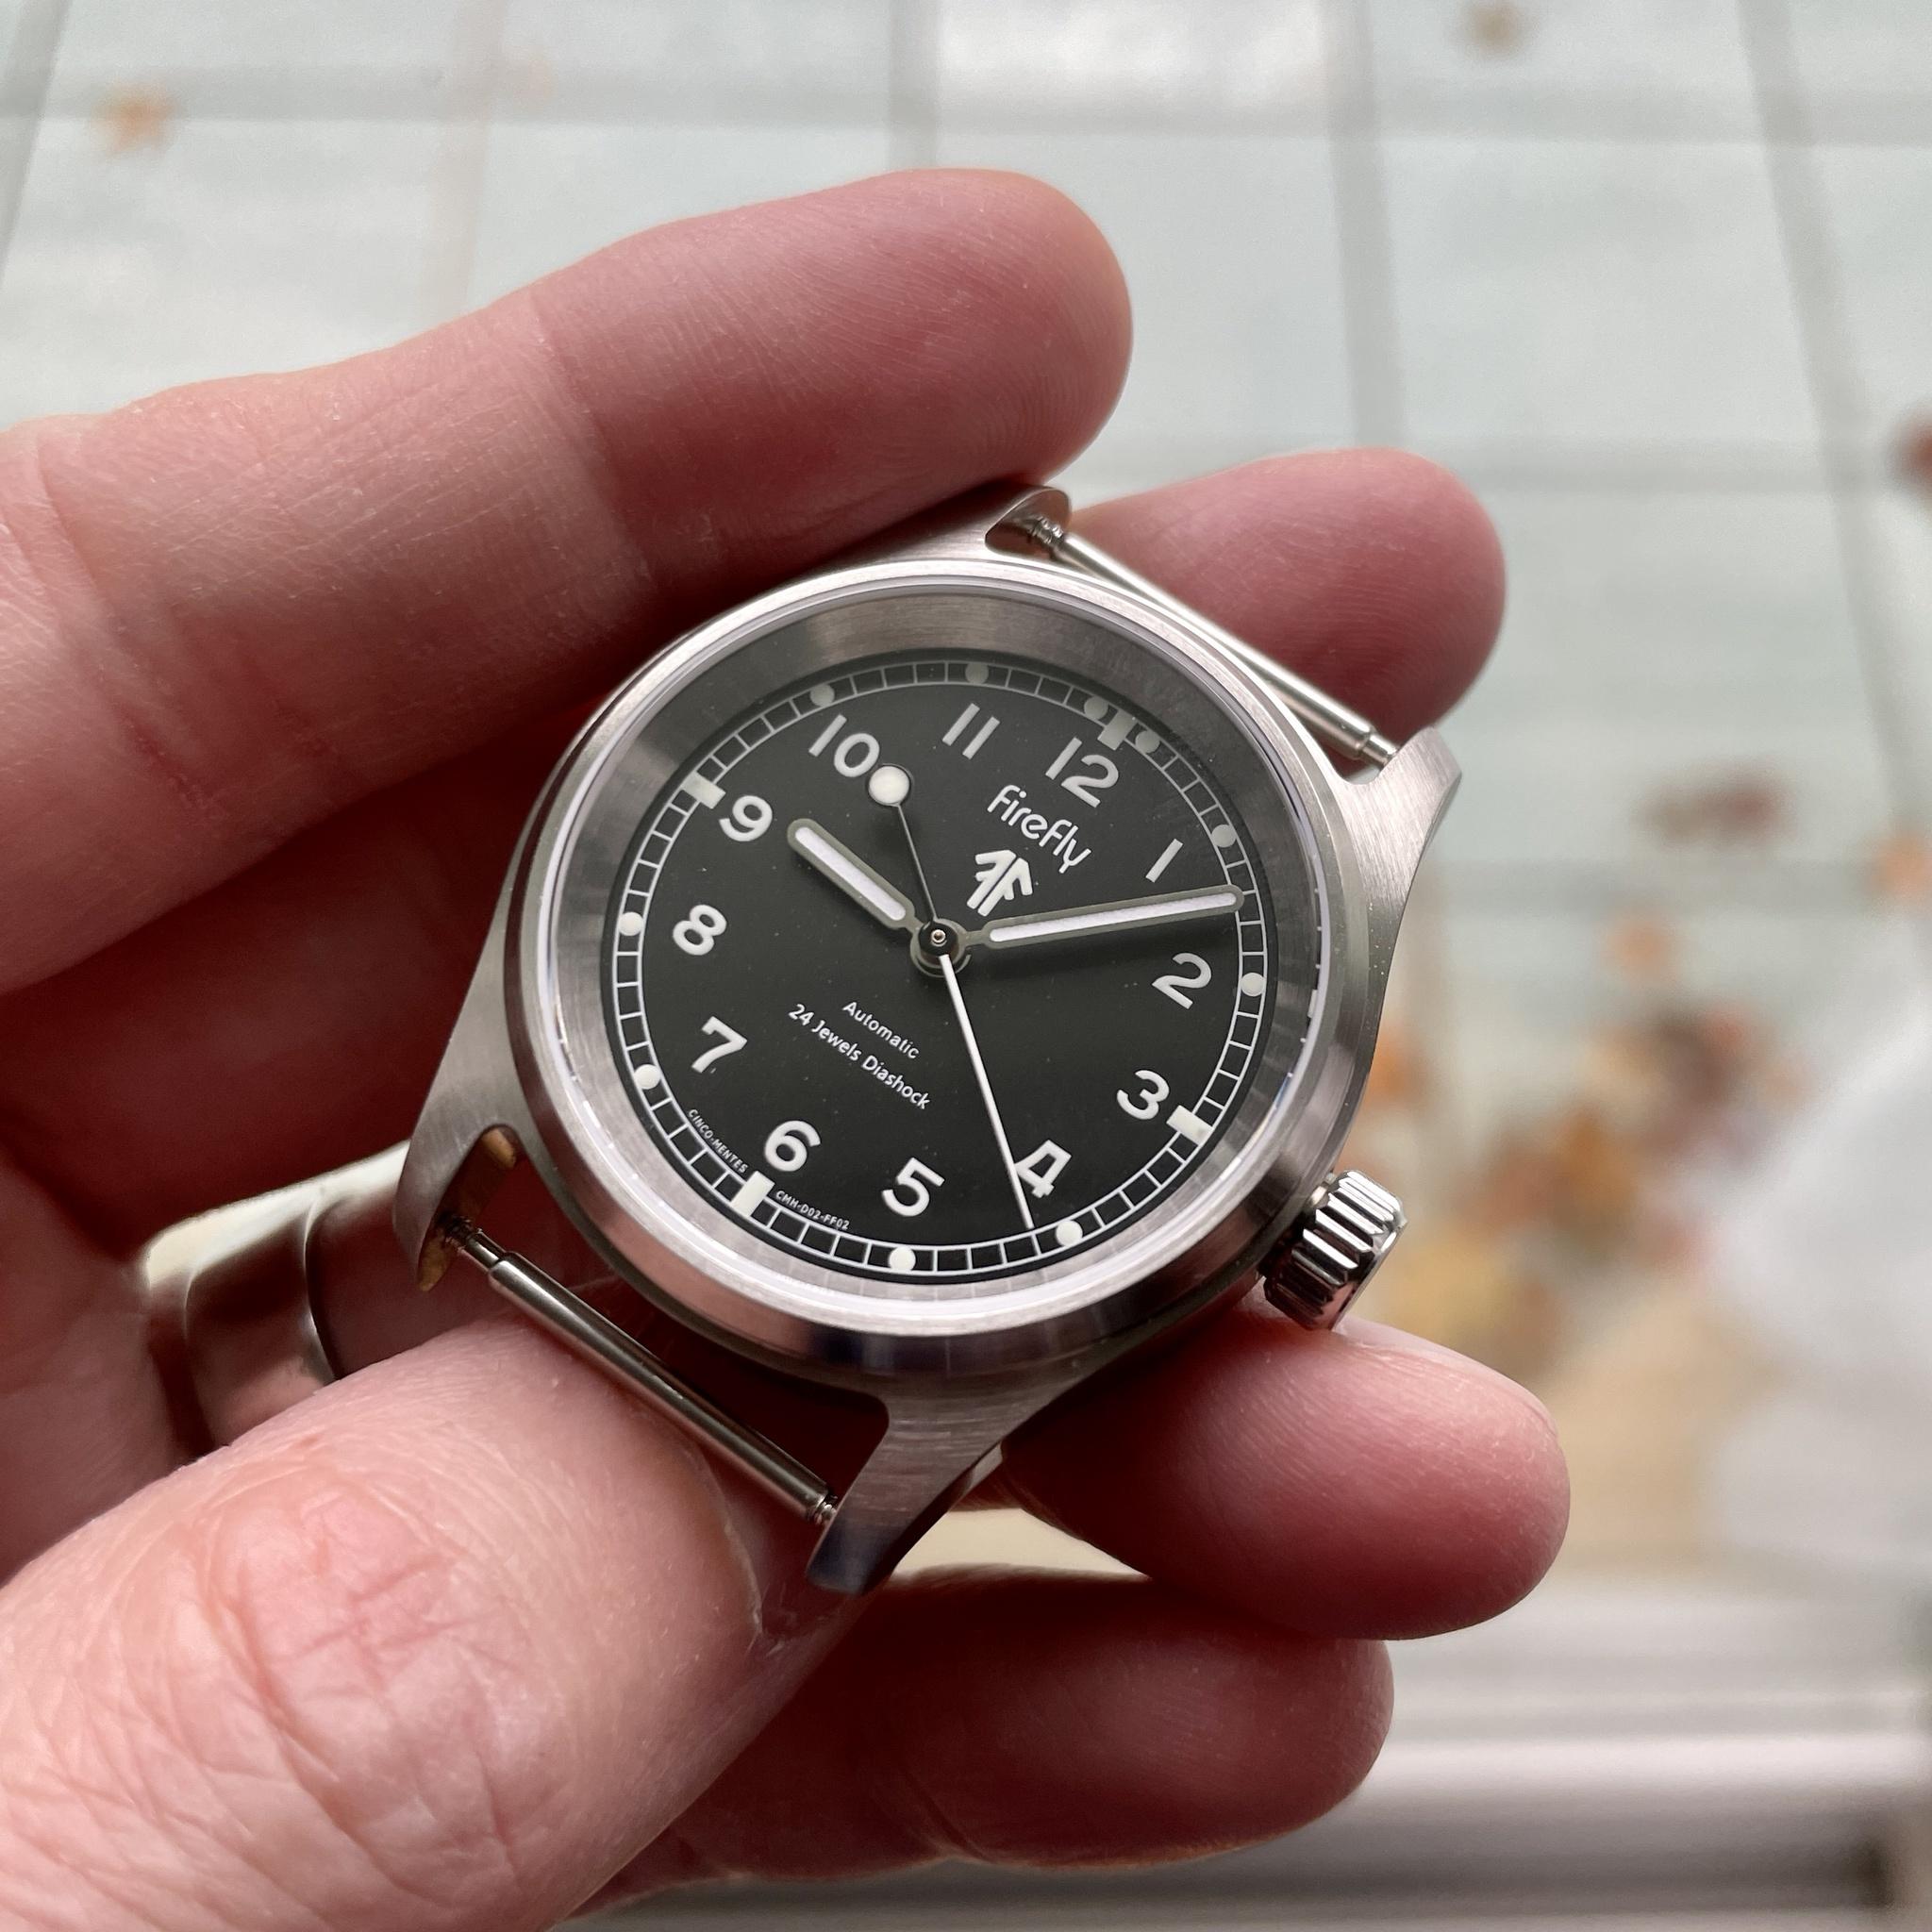 180 USD] For Sale: 36mm Cincomentes Firefly Field watch mod, No date, Seiko  NH35 | WatchCharts